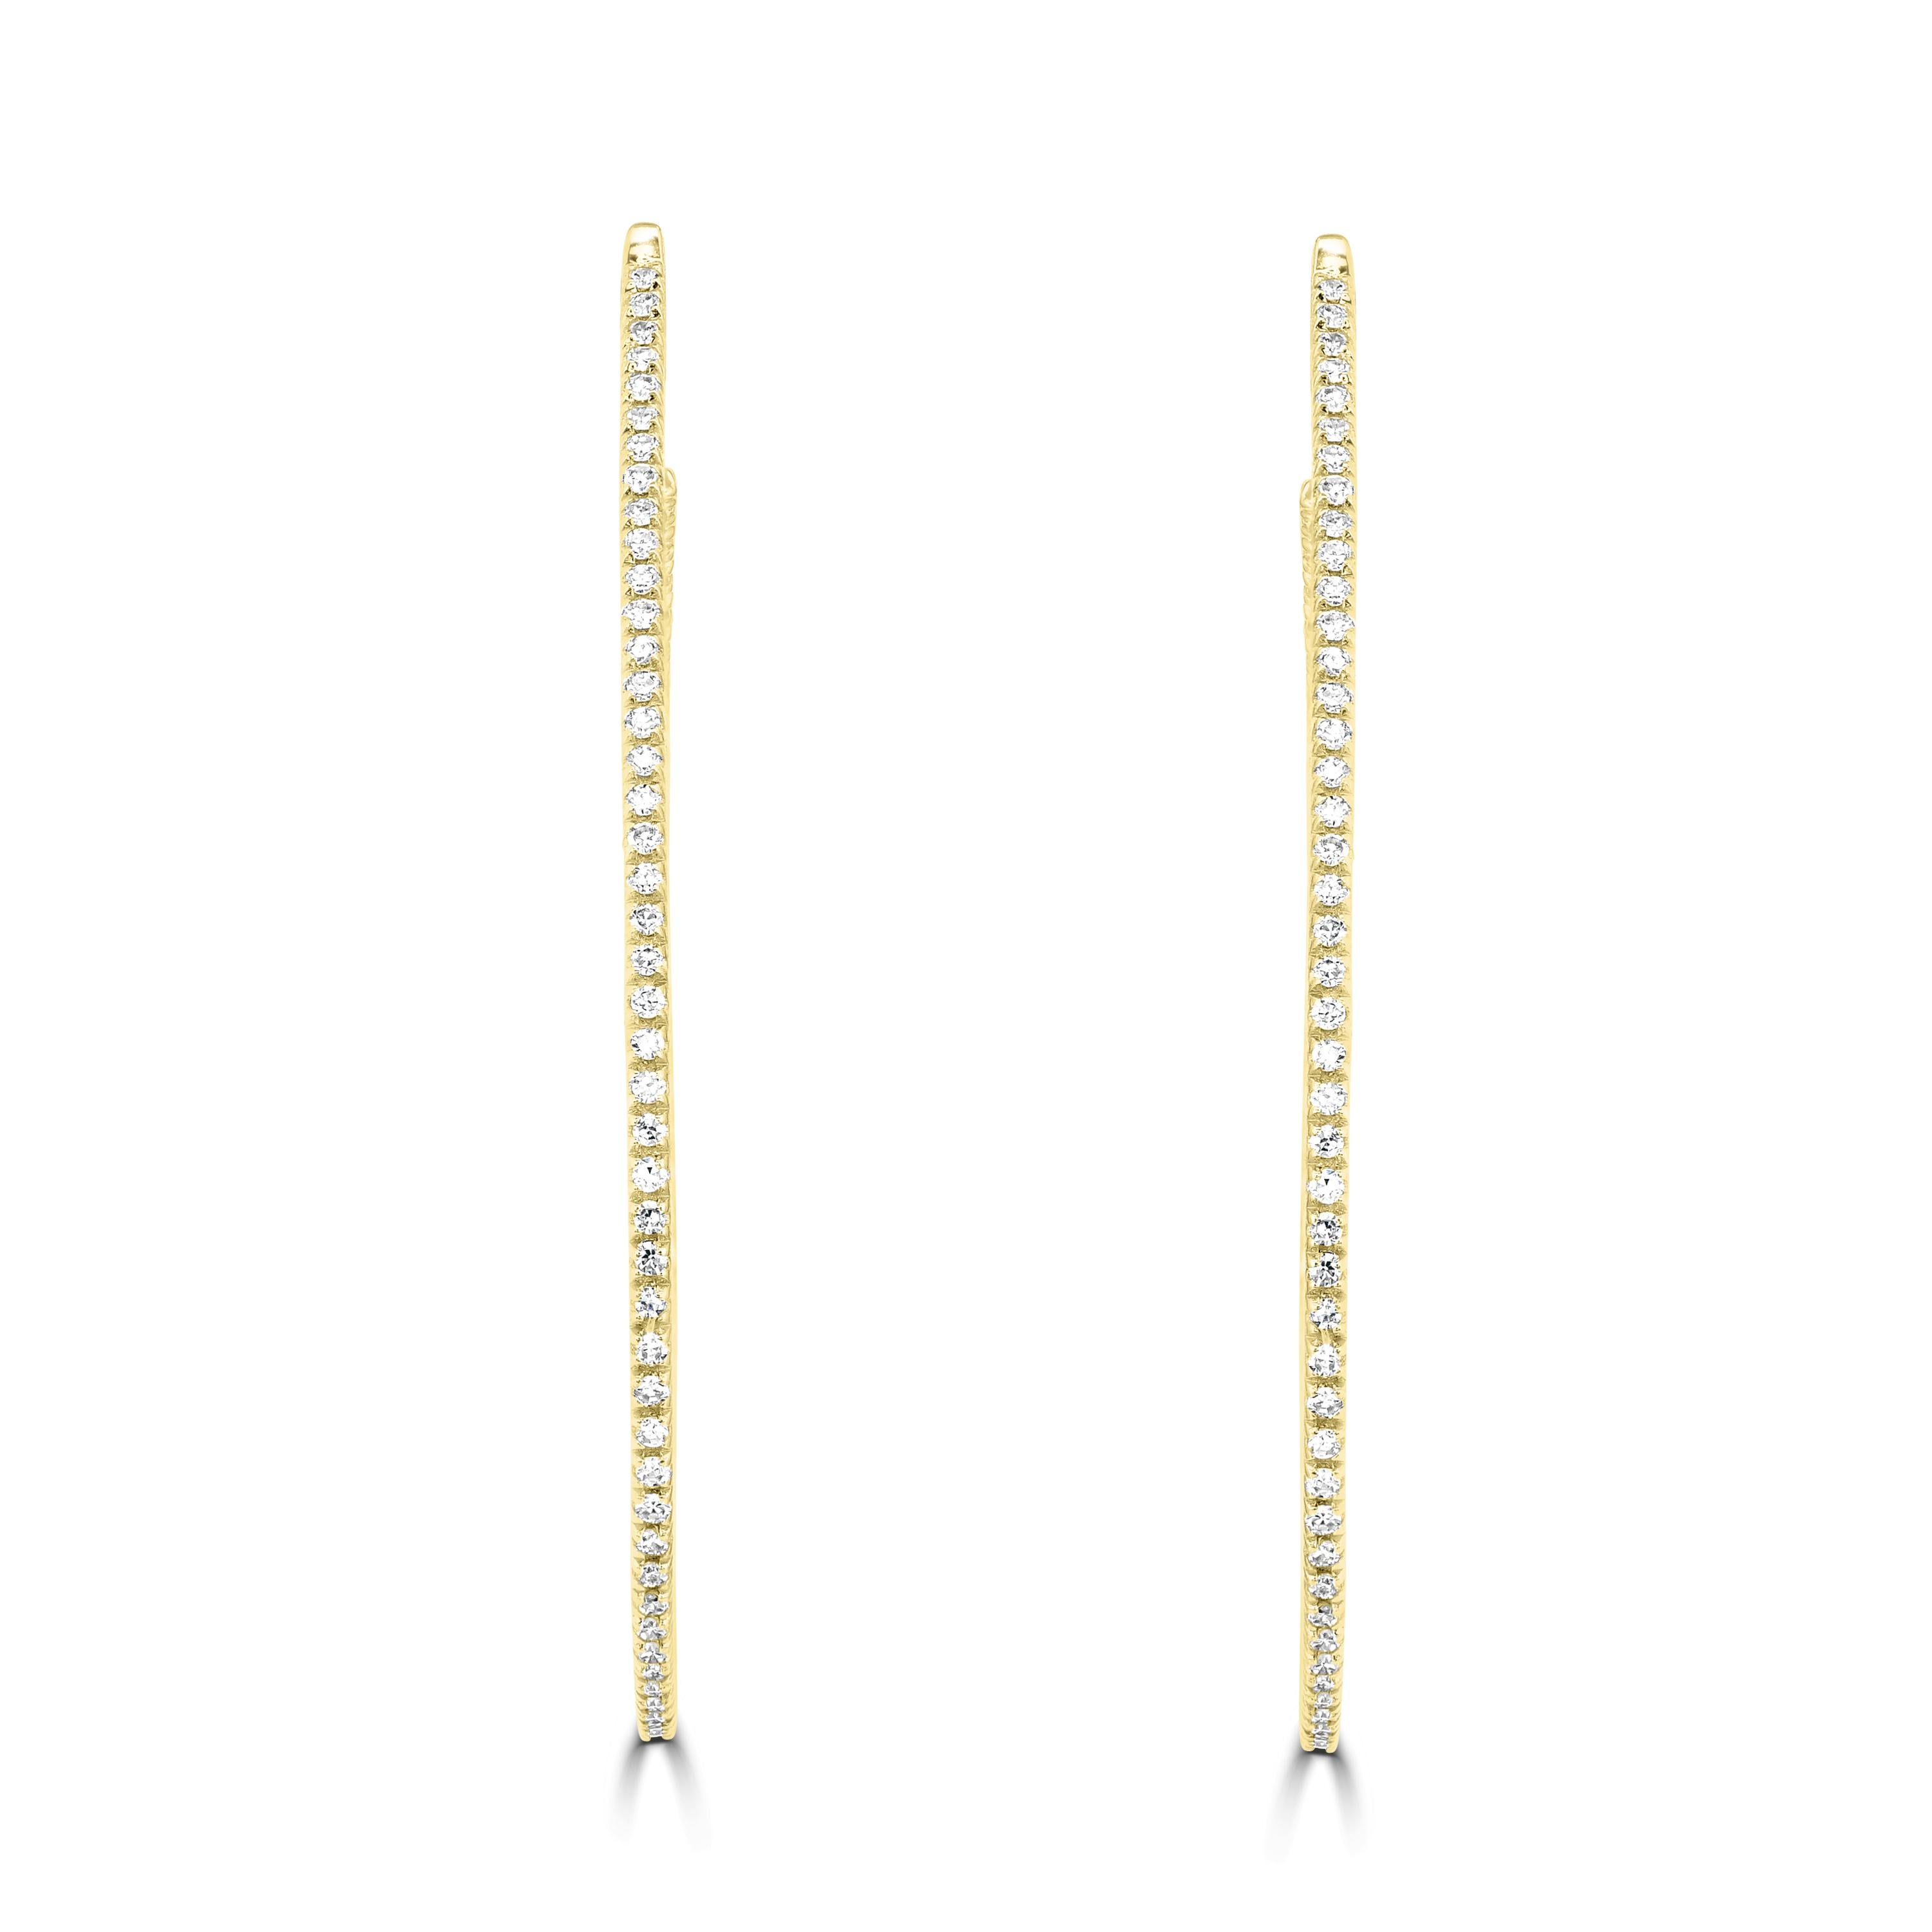 Make a stunning impression with these Luxle beautiful 3/4 hoop earrings made with 14k gold and genuine diamonds for a breathtaking look. Laying out an utterly exquisite 14K Yellow Gold piece. These open pear-shaped hoop earrings, set with 0.62